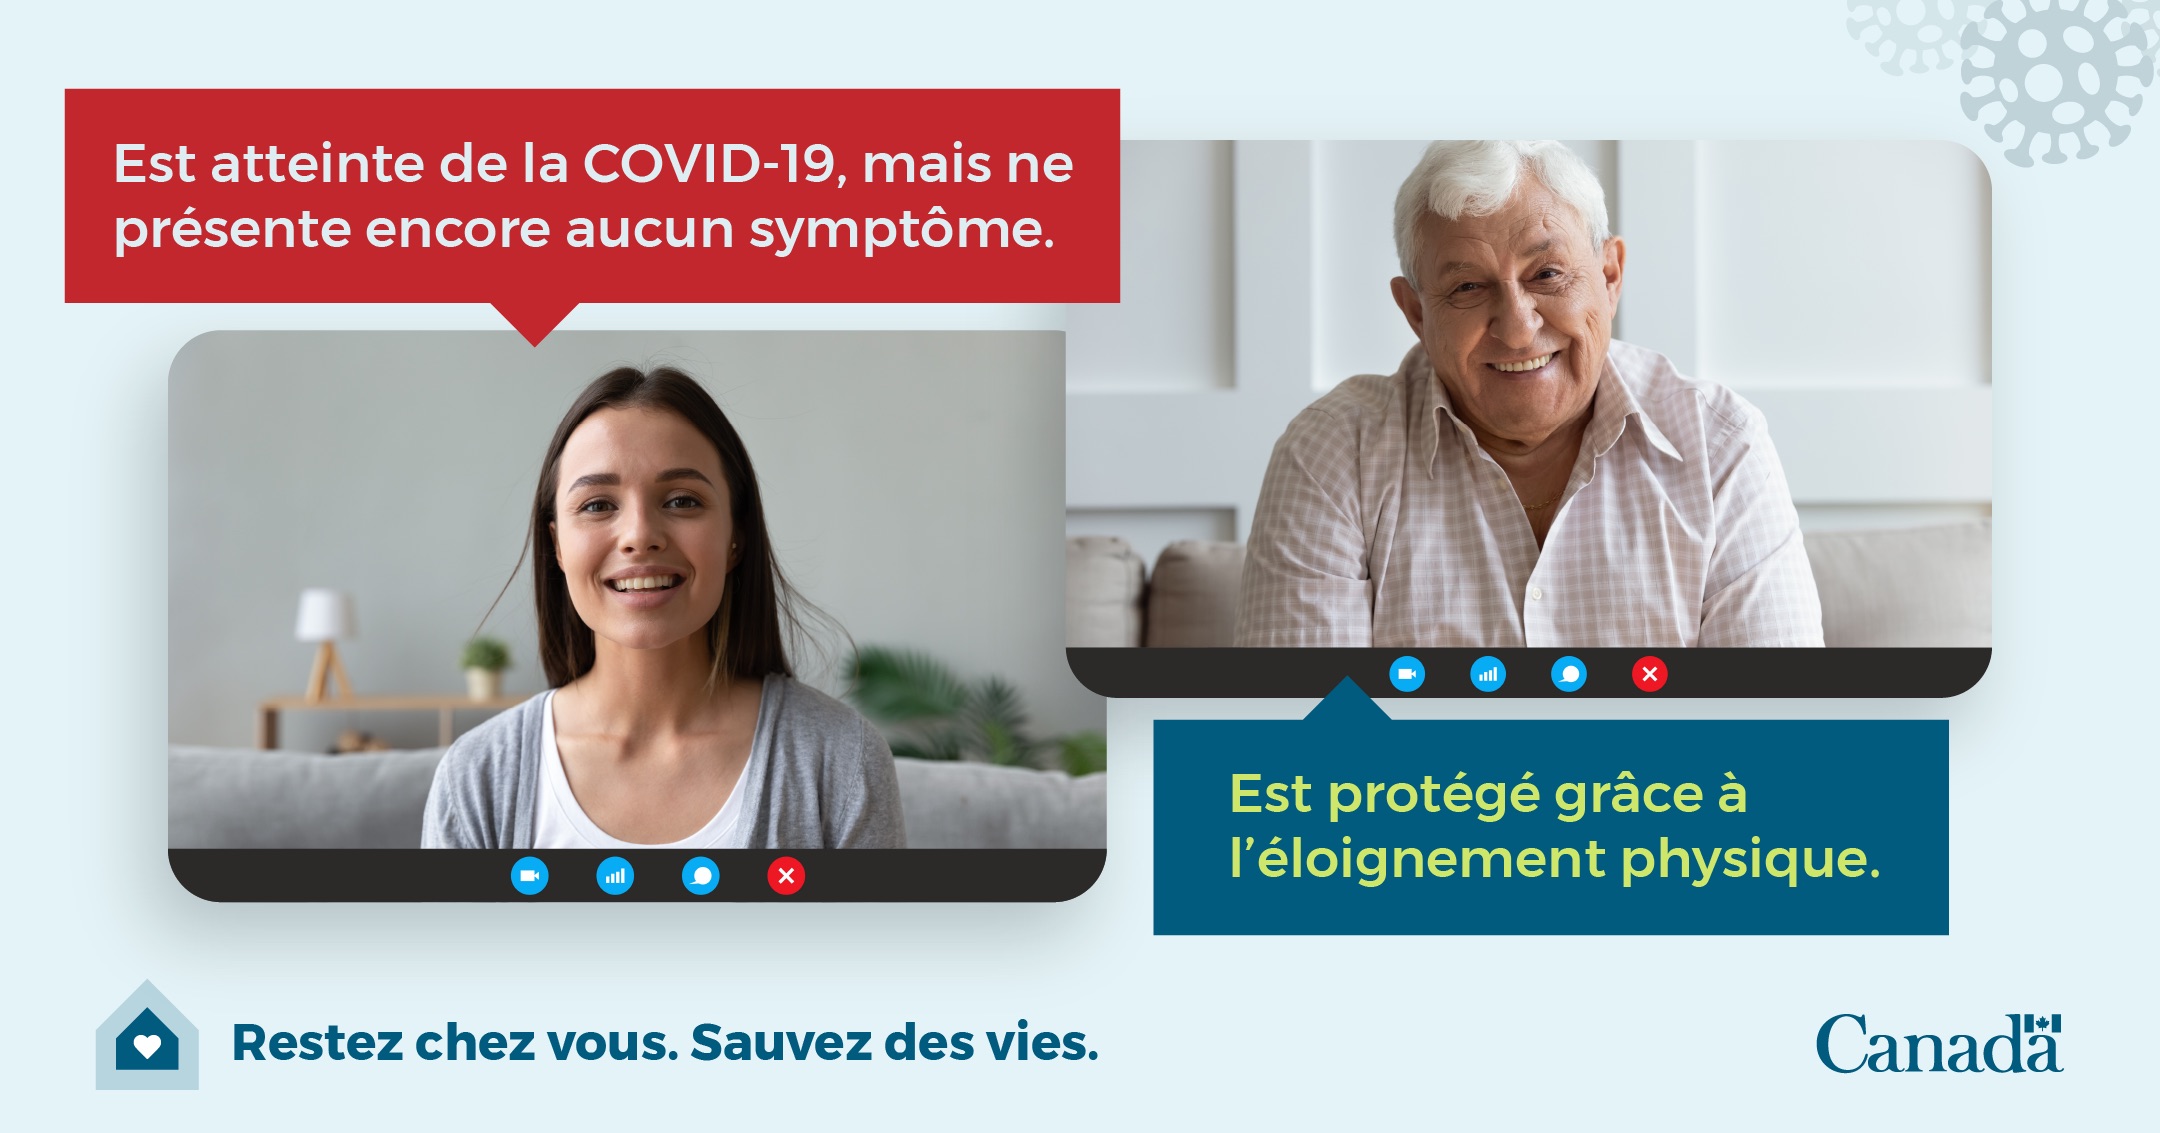 young woman and elderly man video chatting. The woman has covid-19 but isn't showing symptoms yet. The elderly man is protected because of physical distancing.